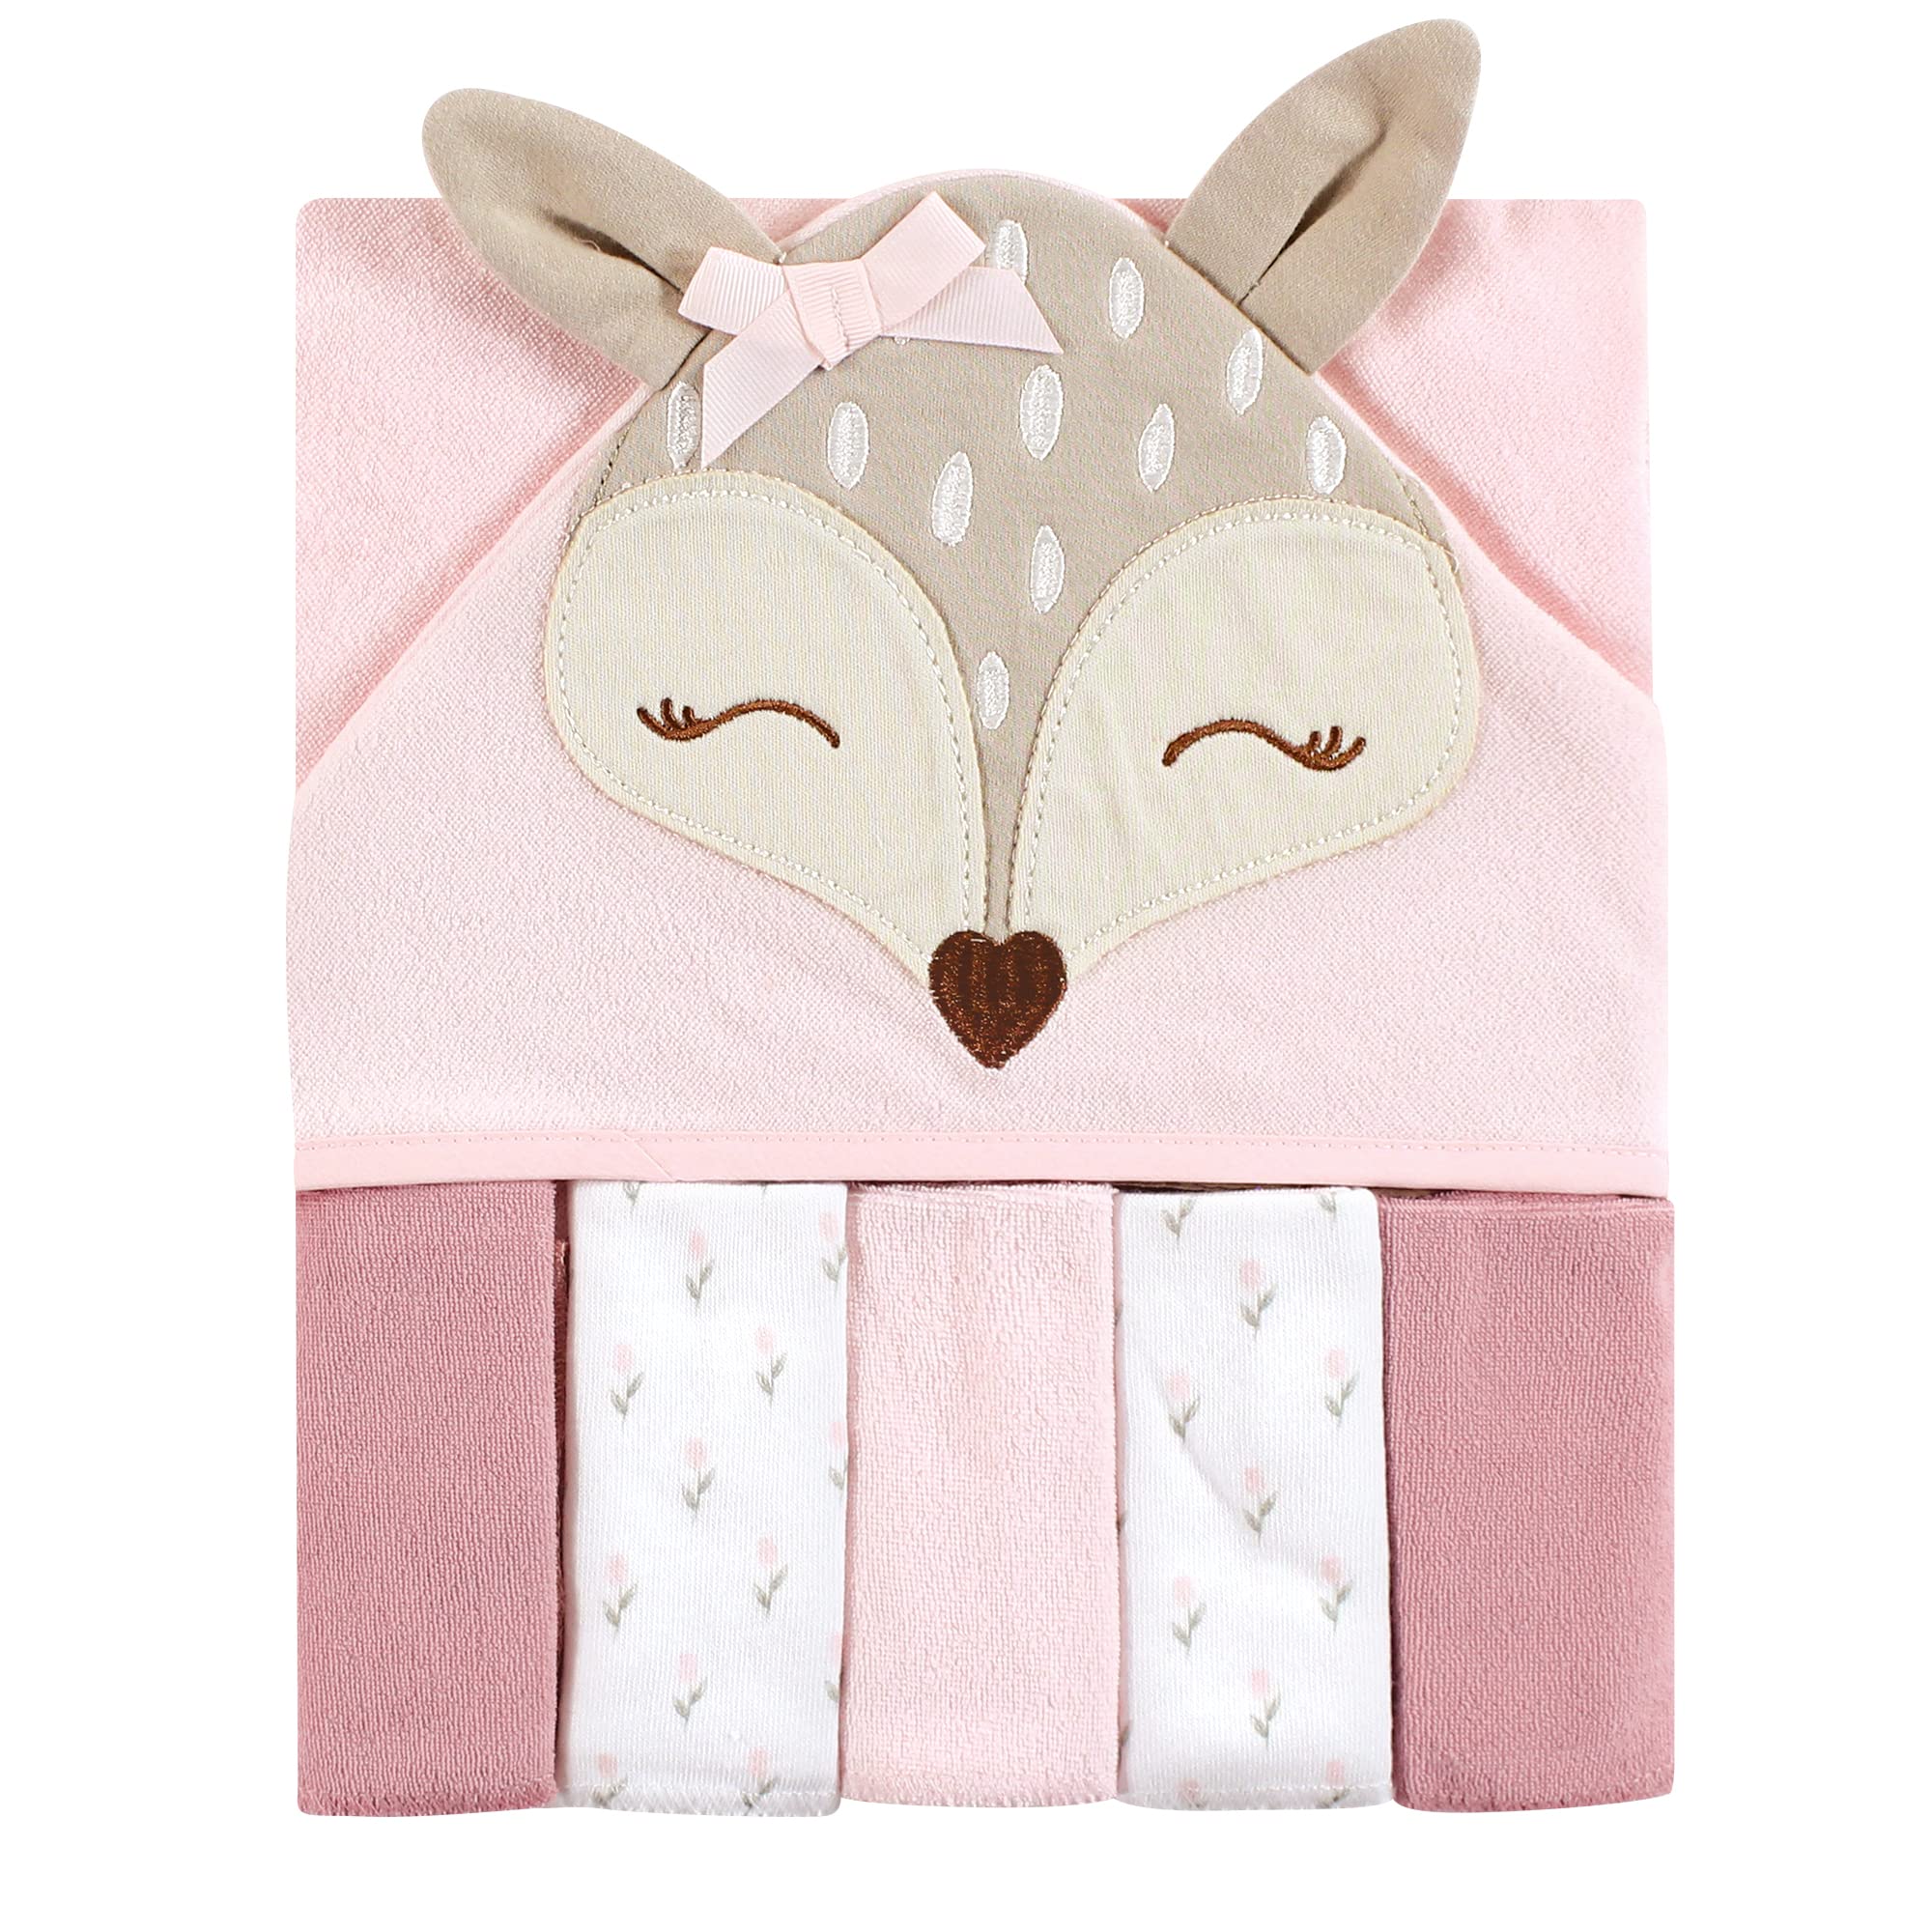 Hudson Baby Unisex Baby Hooded Towel and Five Washcloths, Fawn, One Size